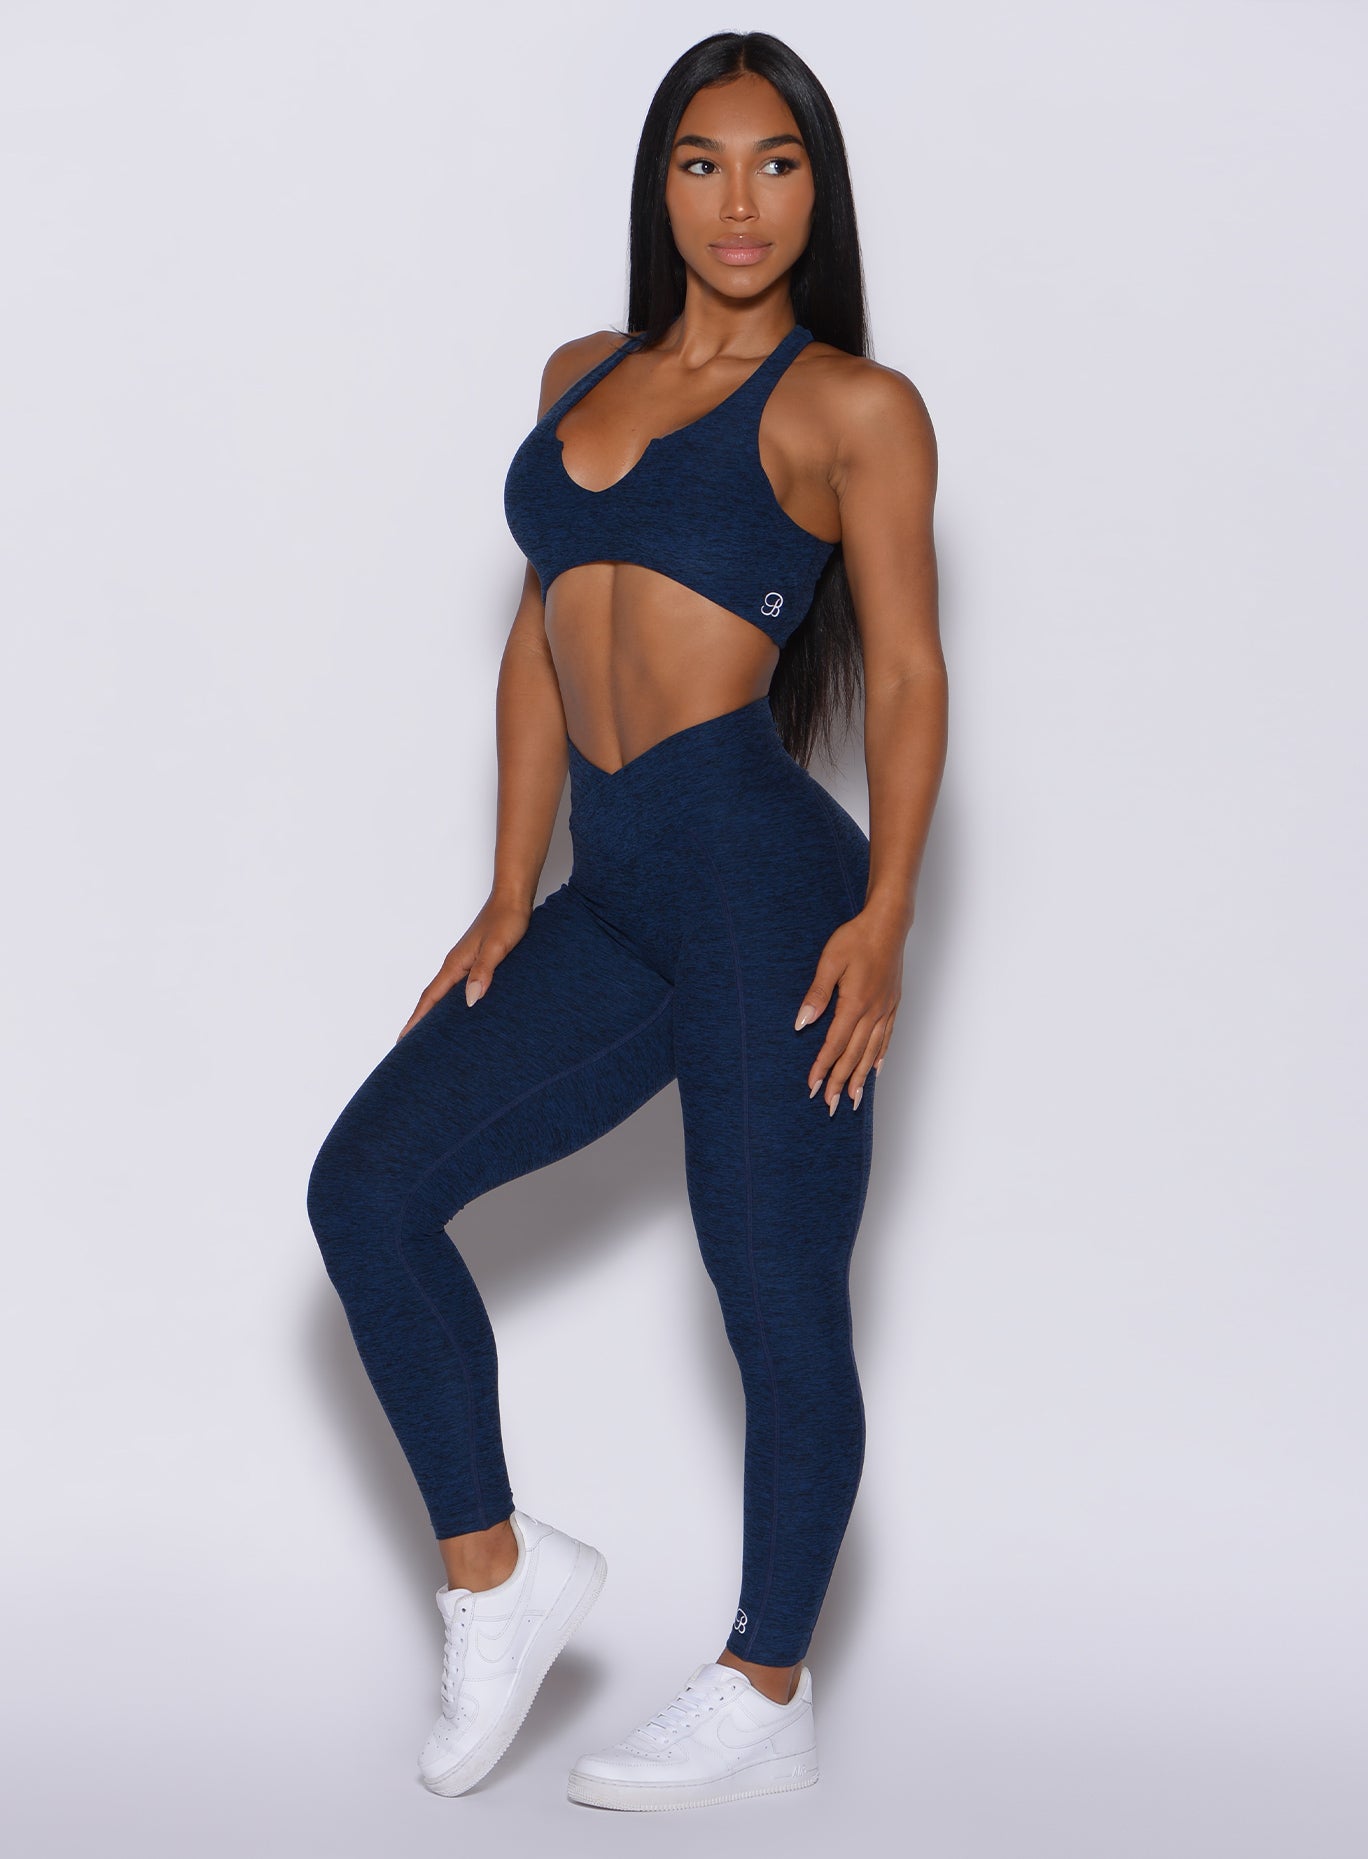 Left side  profile view of a model angled to her left wearing our Brazilian Contour Leggings in sapphire blue color and a matching bra